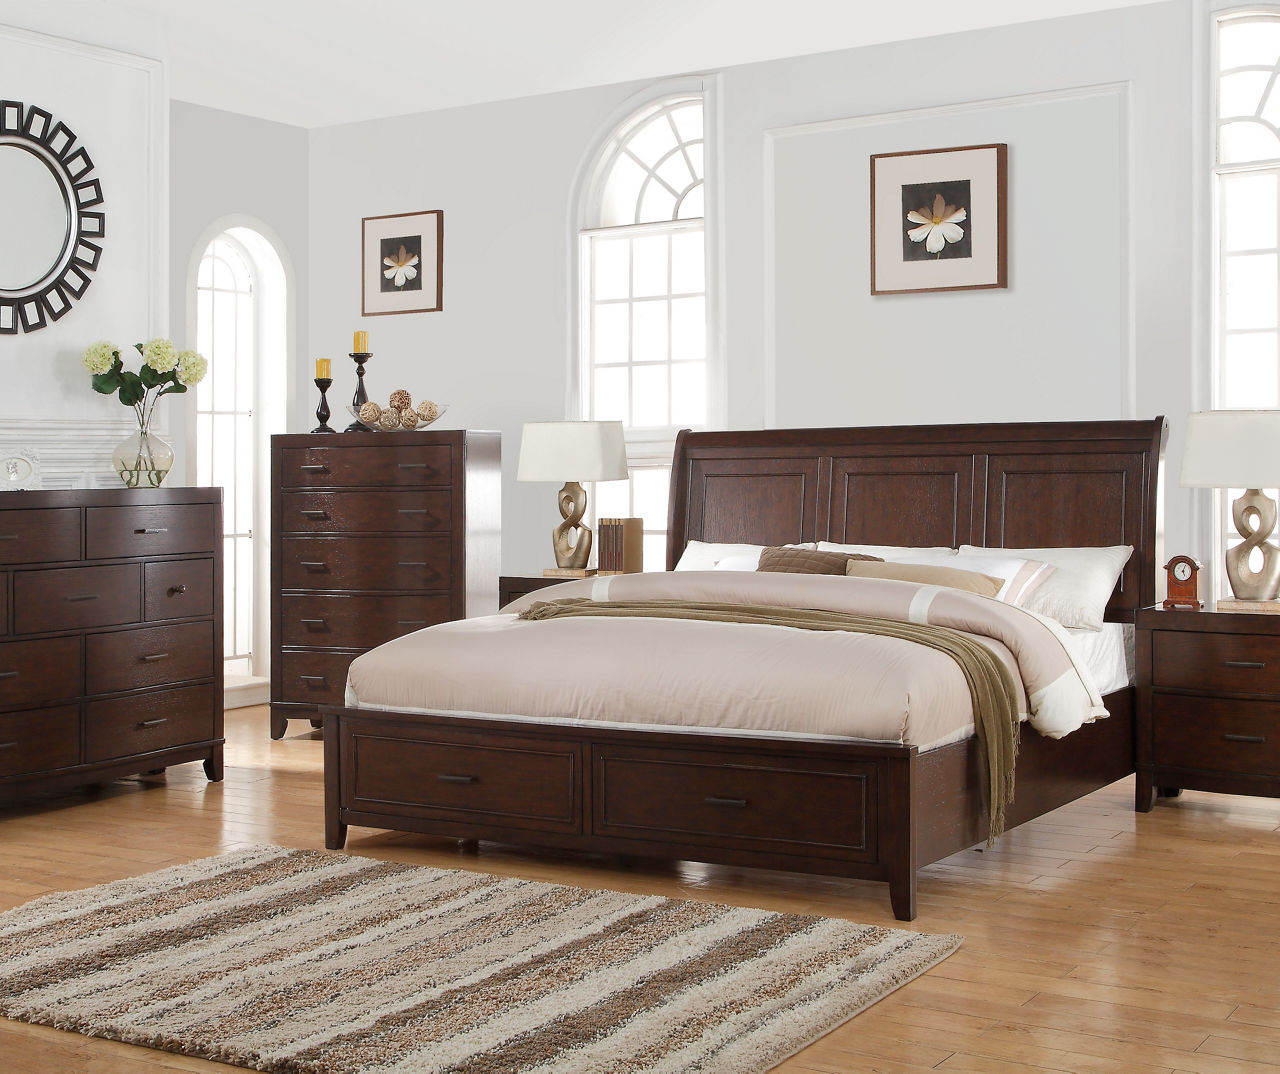 Big Lots Springfield: Furniture, mattress & home product store in  Springfield, OR